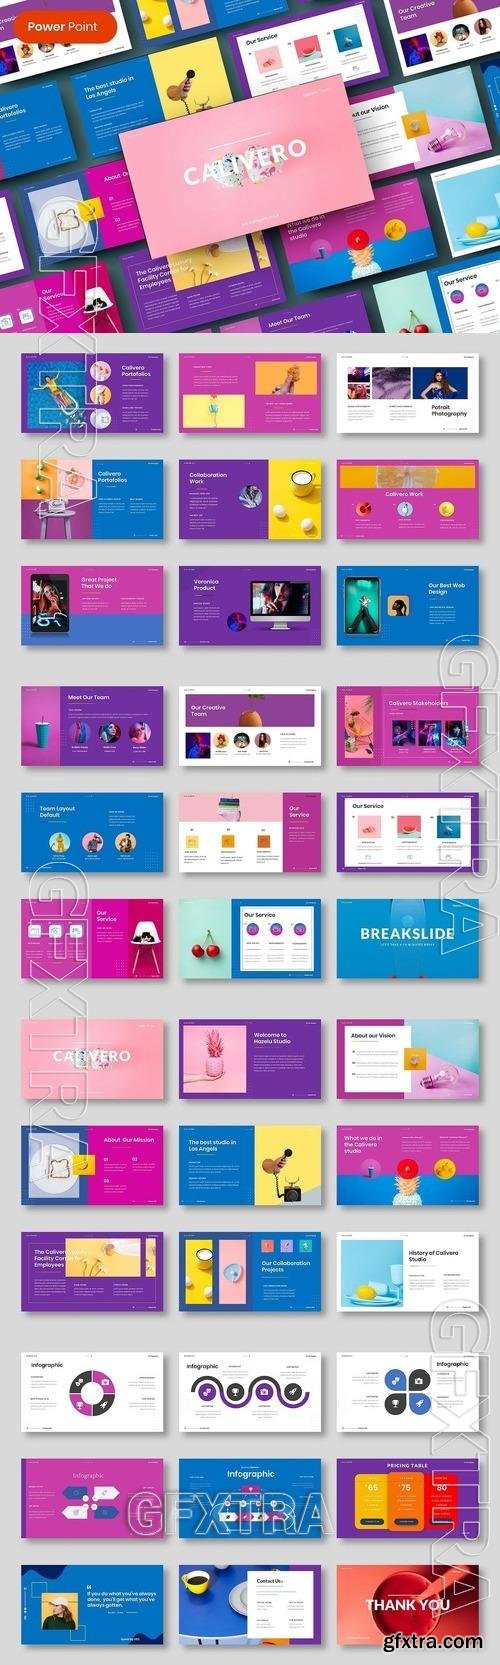 Calivero – Creative Business PowerPoint Template TCSL276